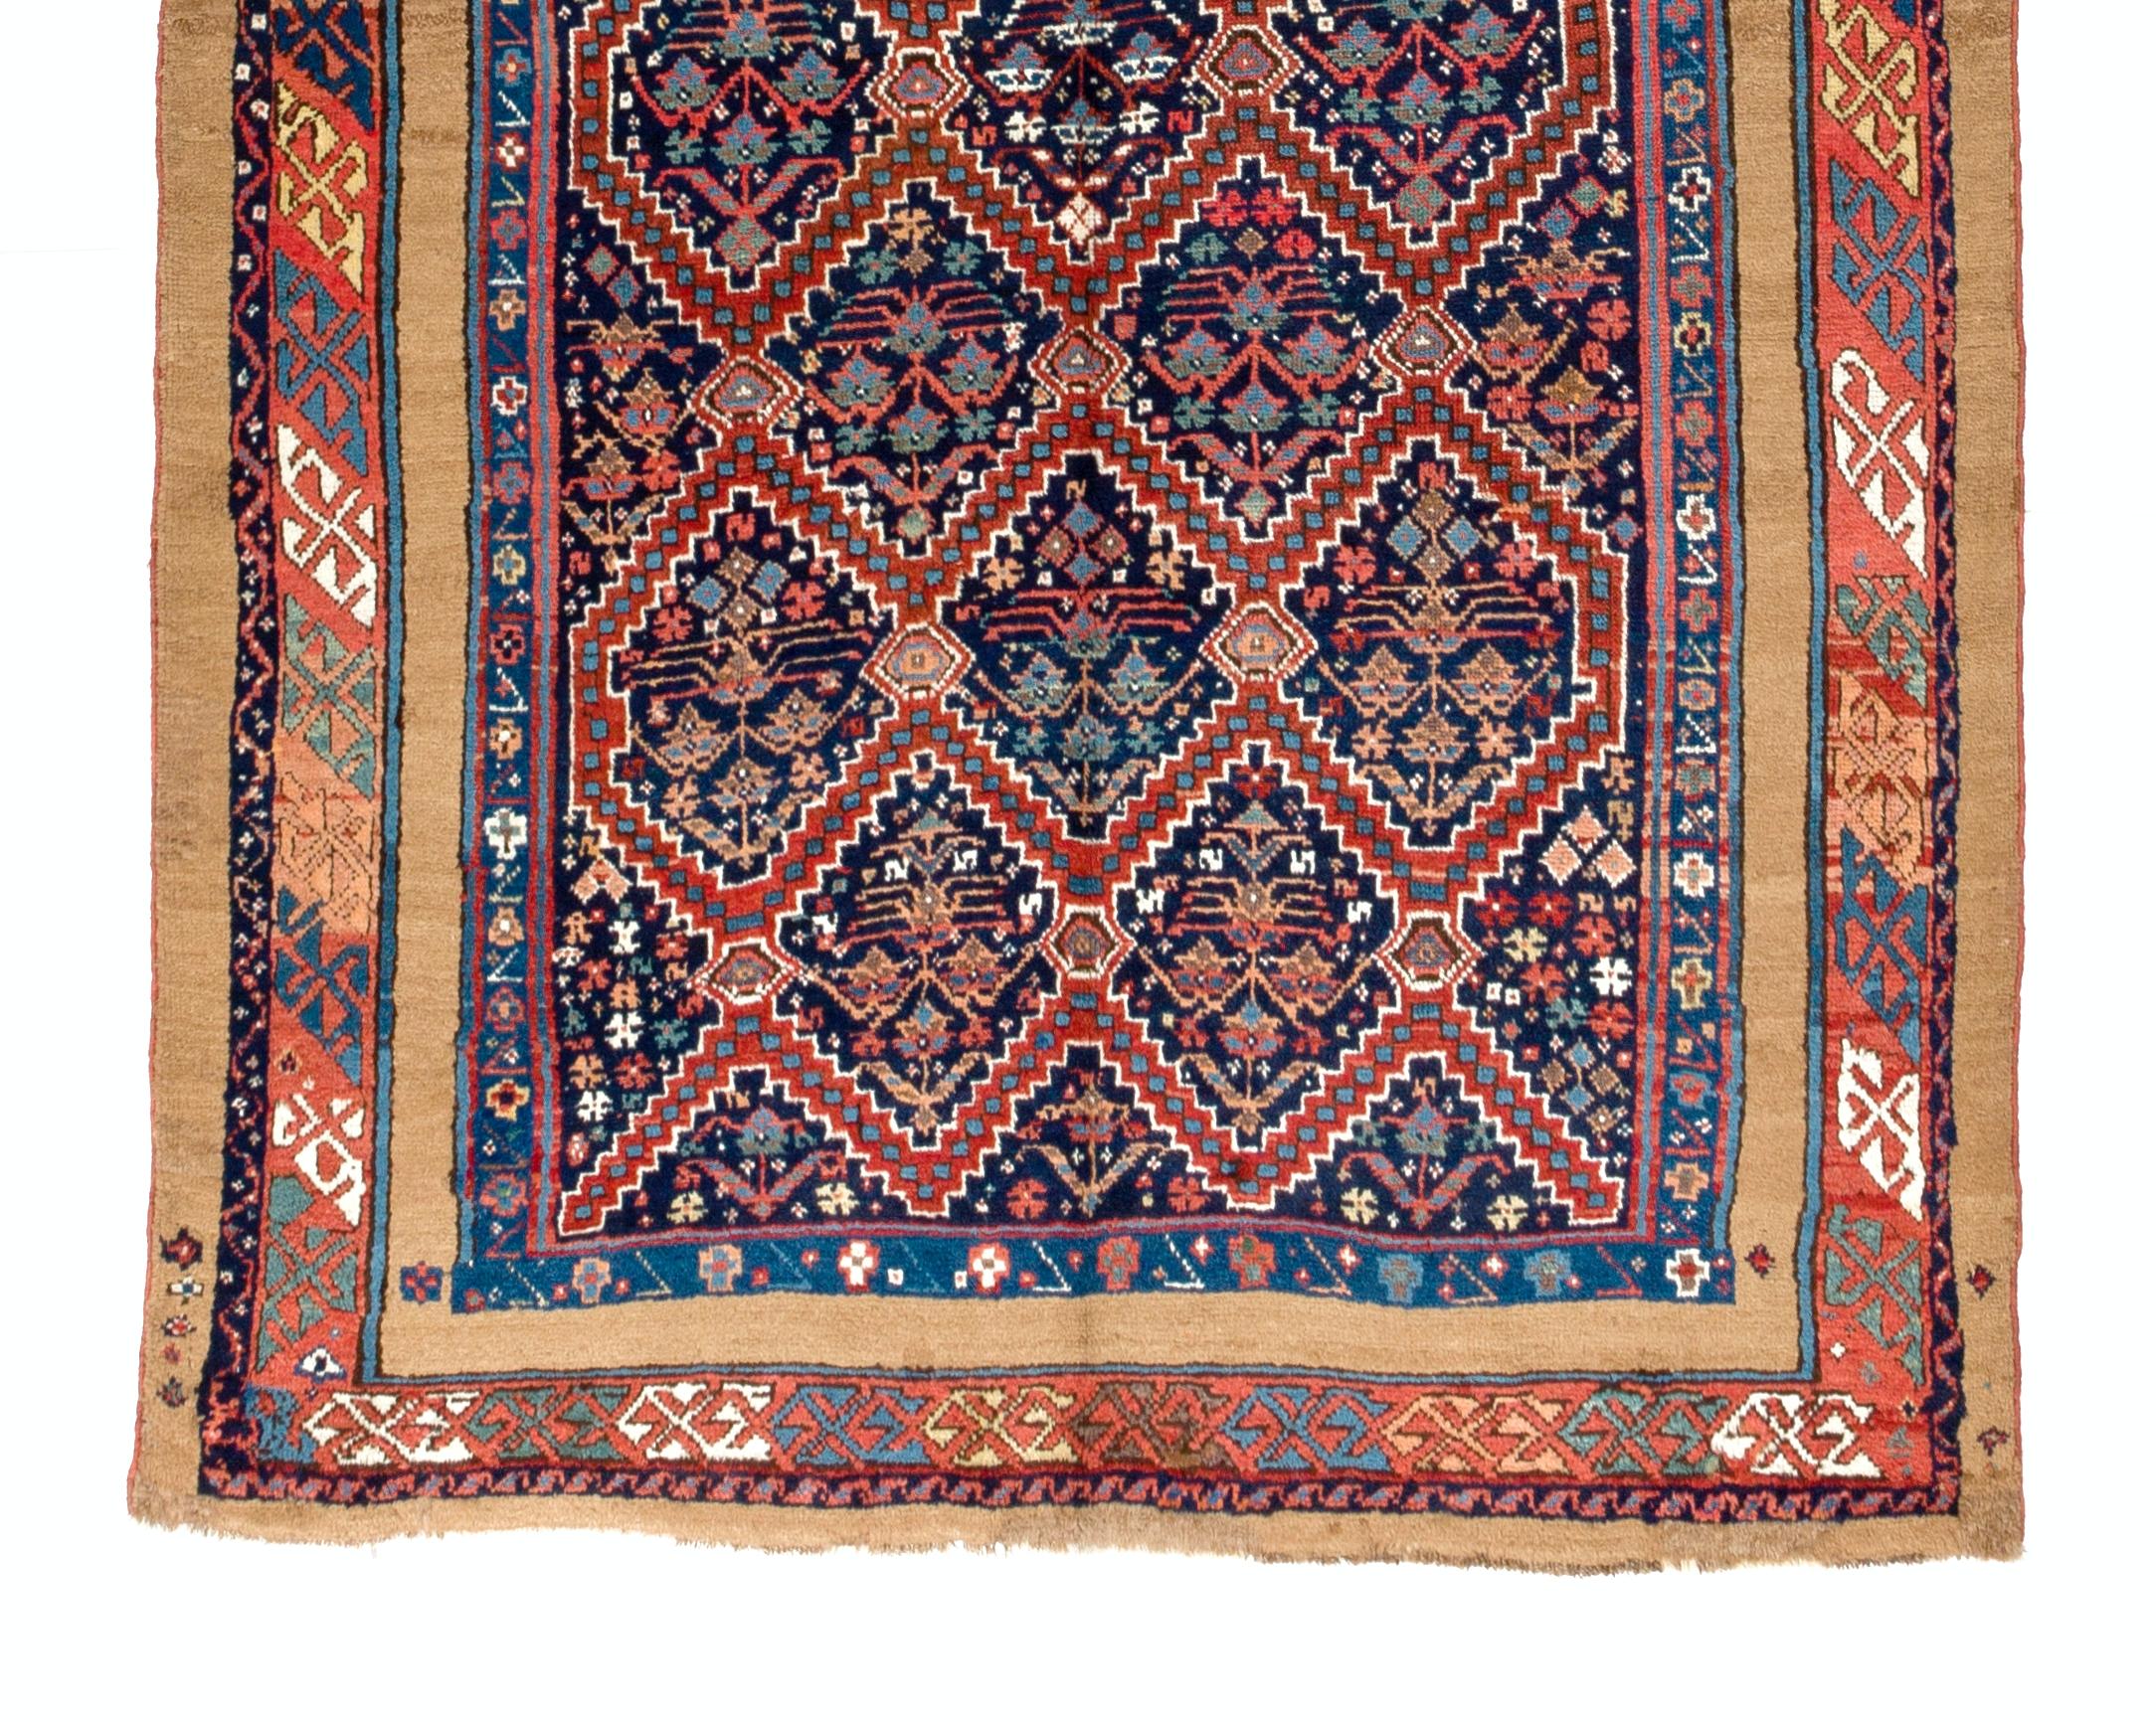 Hand-Knotted 4.6x11.5 Ft Antique Serab Runner, Northwest Persia, One-of-a-Kind Rug, CA 1875 For Sale